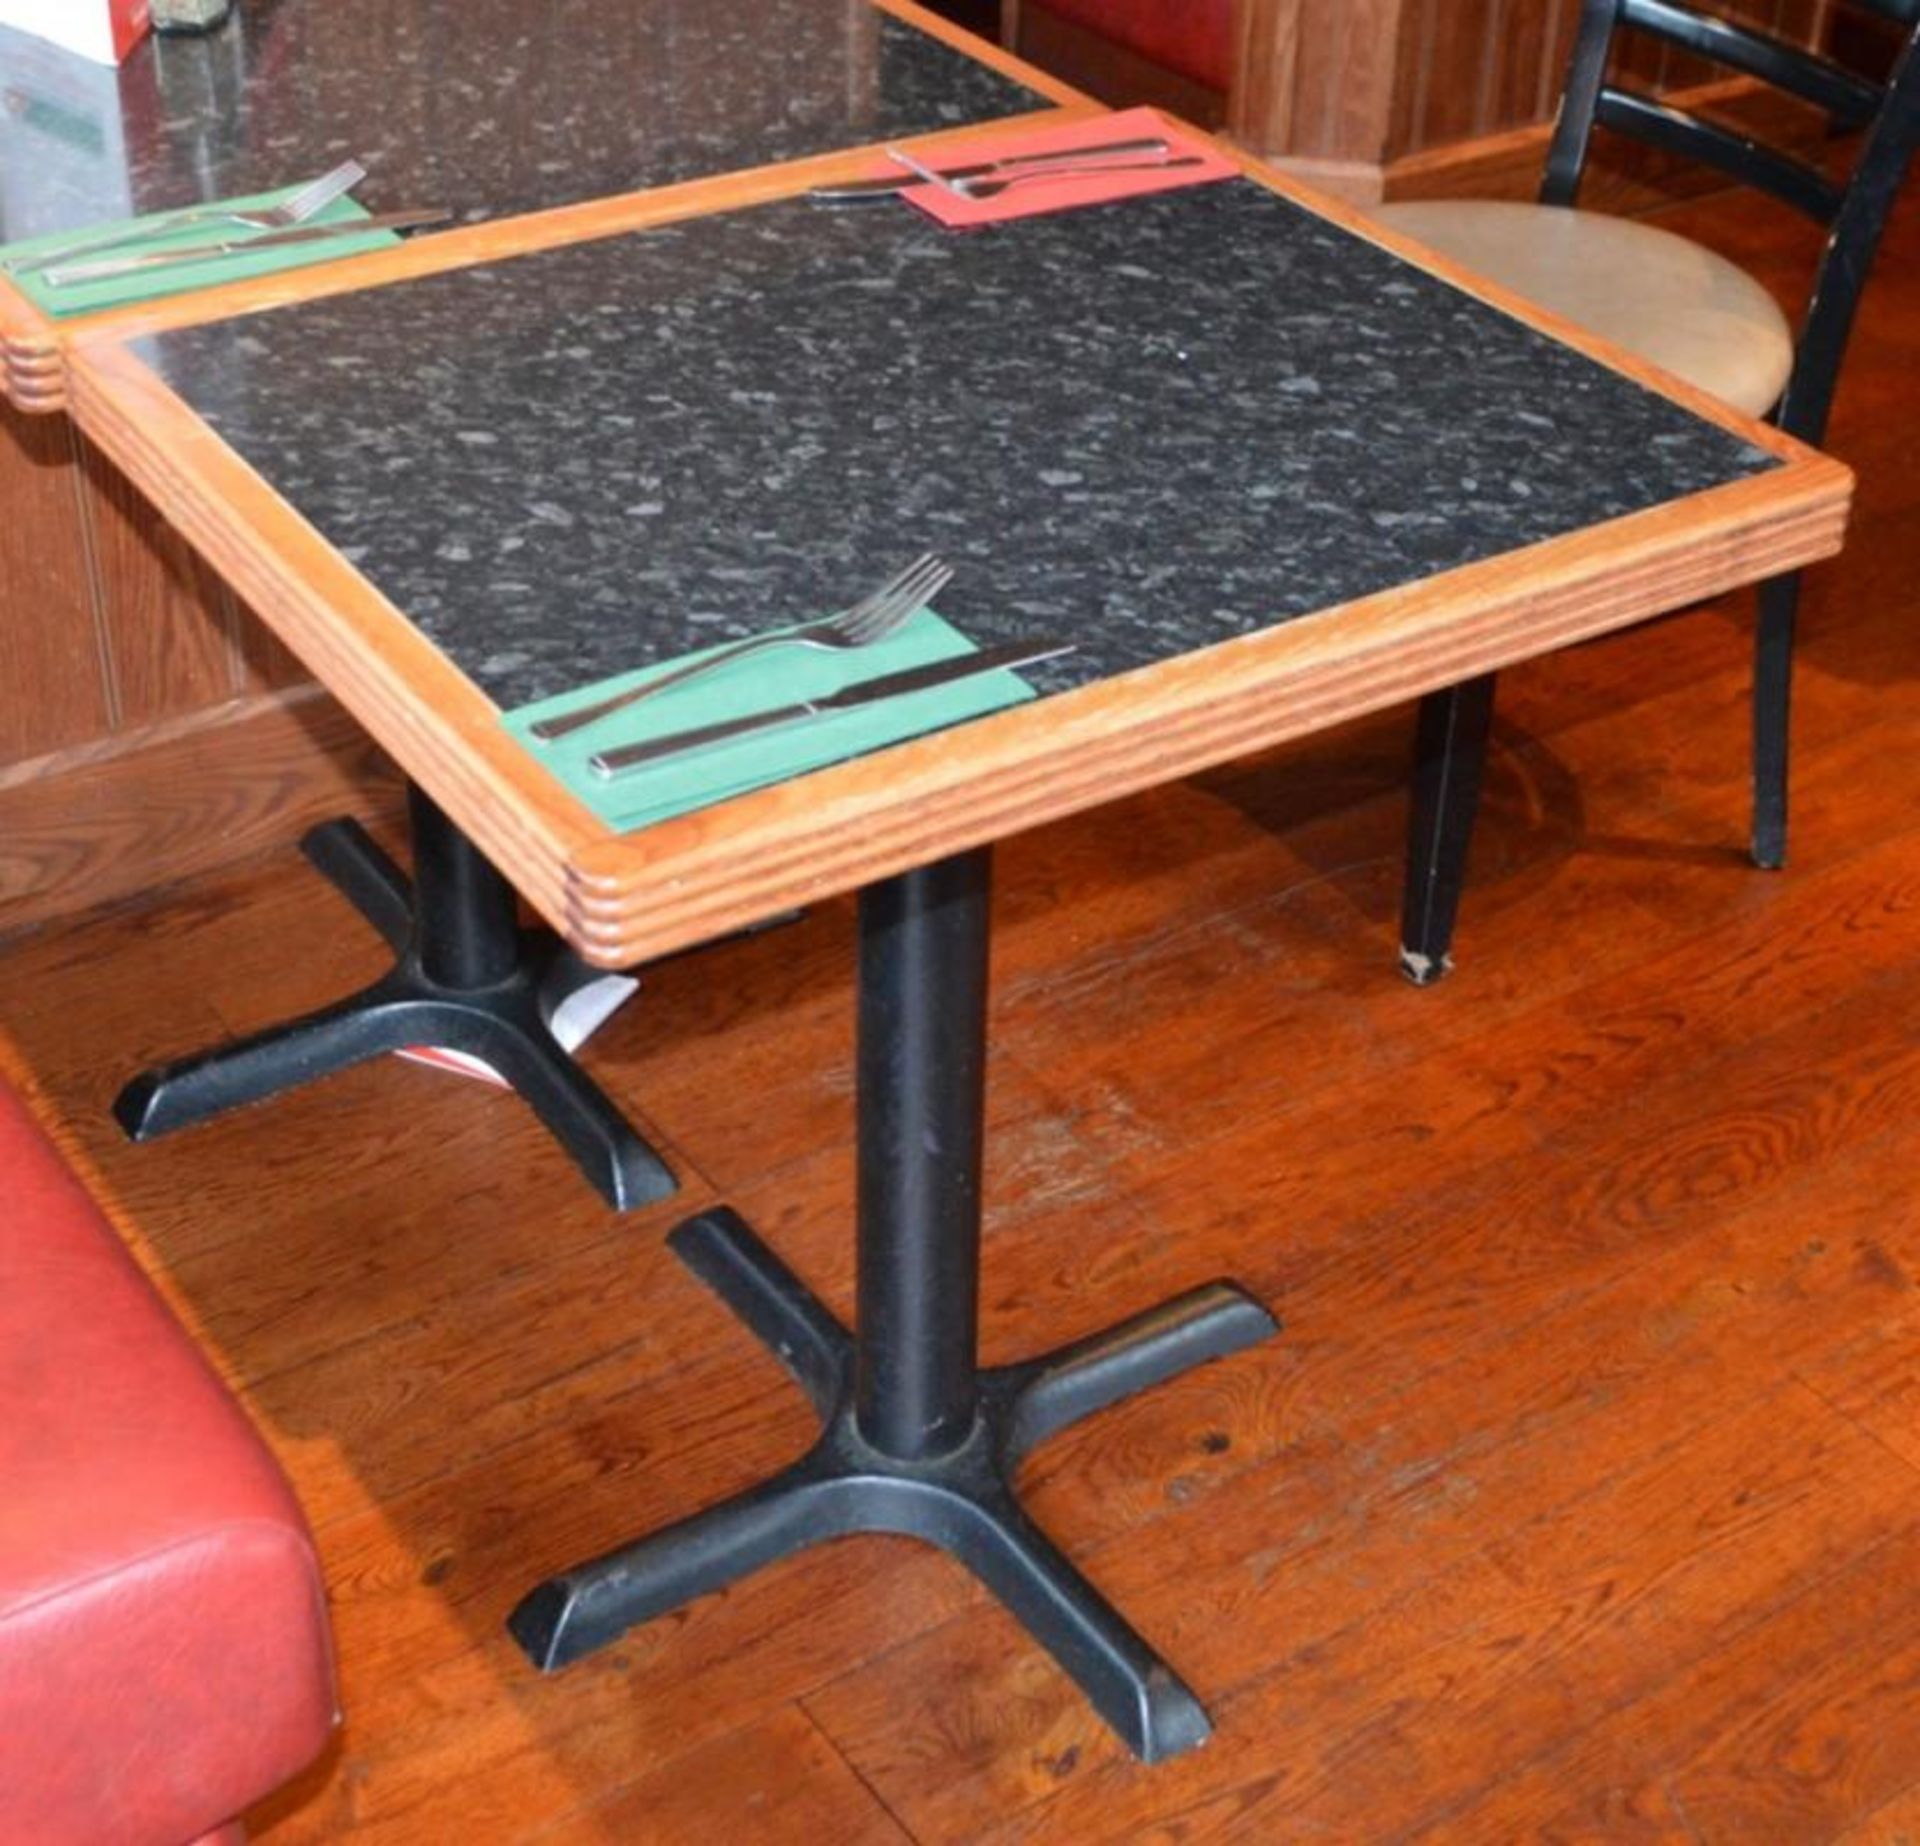 5 x Small Two Seater Restaurant Dining Tables With Granite Effect Surface, Wooden Edging and Cast Ir